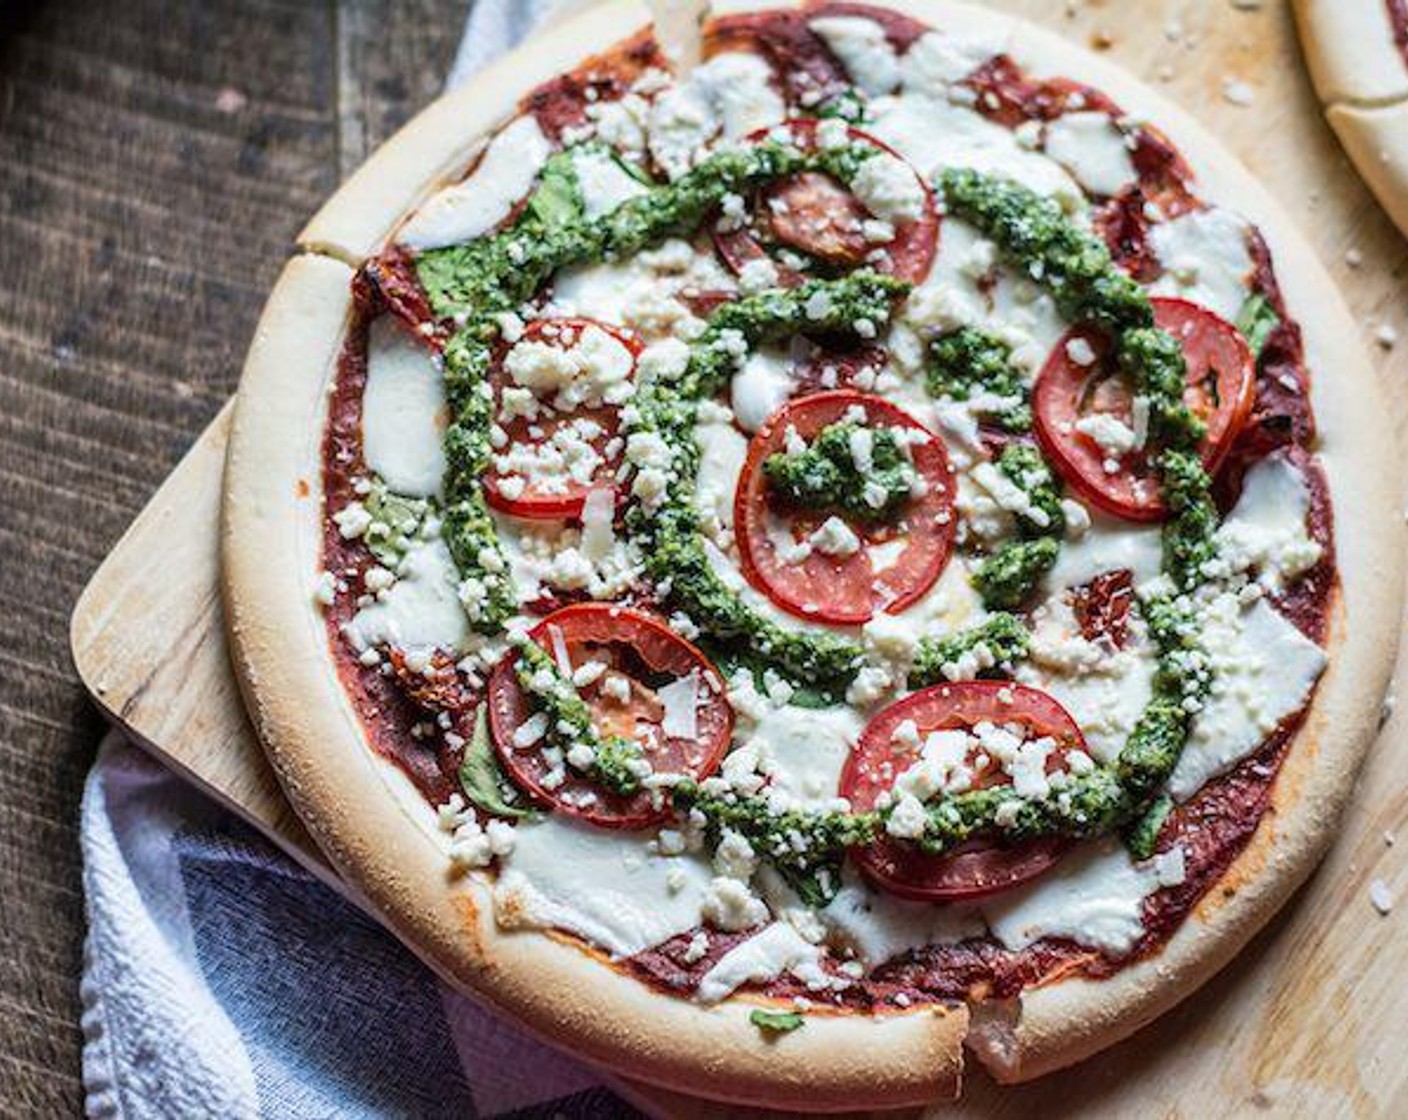 step 4 To assemble pizzas, add homemade pizza sauce to both Gluten-Free Pizza Crusts (2) followed by a single layer of Fresh Spinach (1/2 cup) and Sun-Dried Tomatoes (1/3 cup). Then, top with Fresh Mozzarella Cheese Ball (2/3 cup) and finally layer Roma Tomato (1).